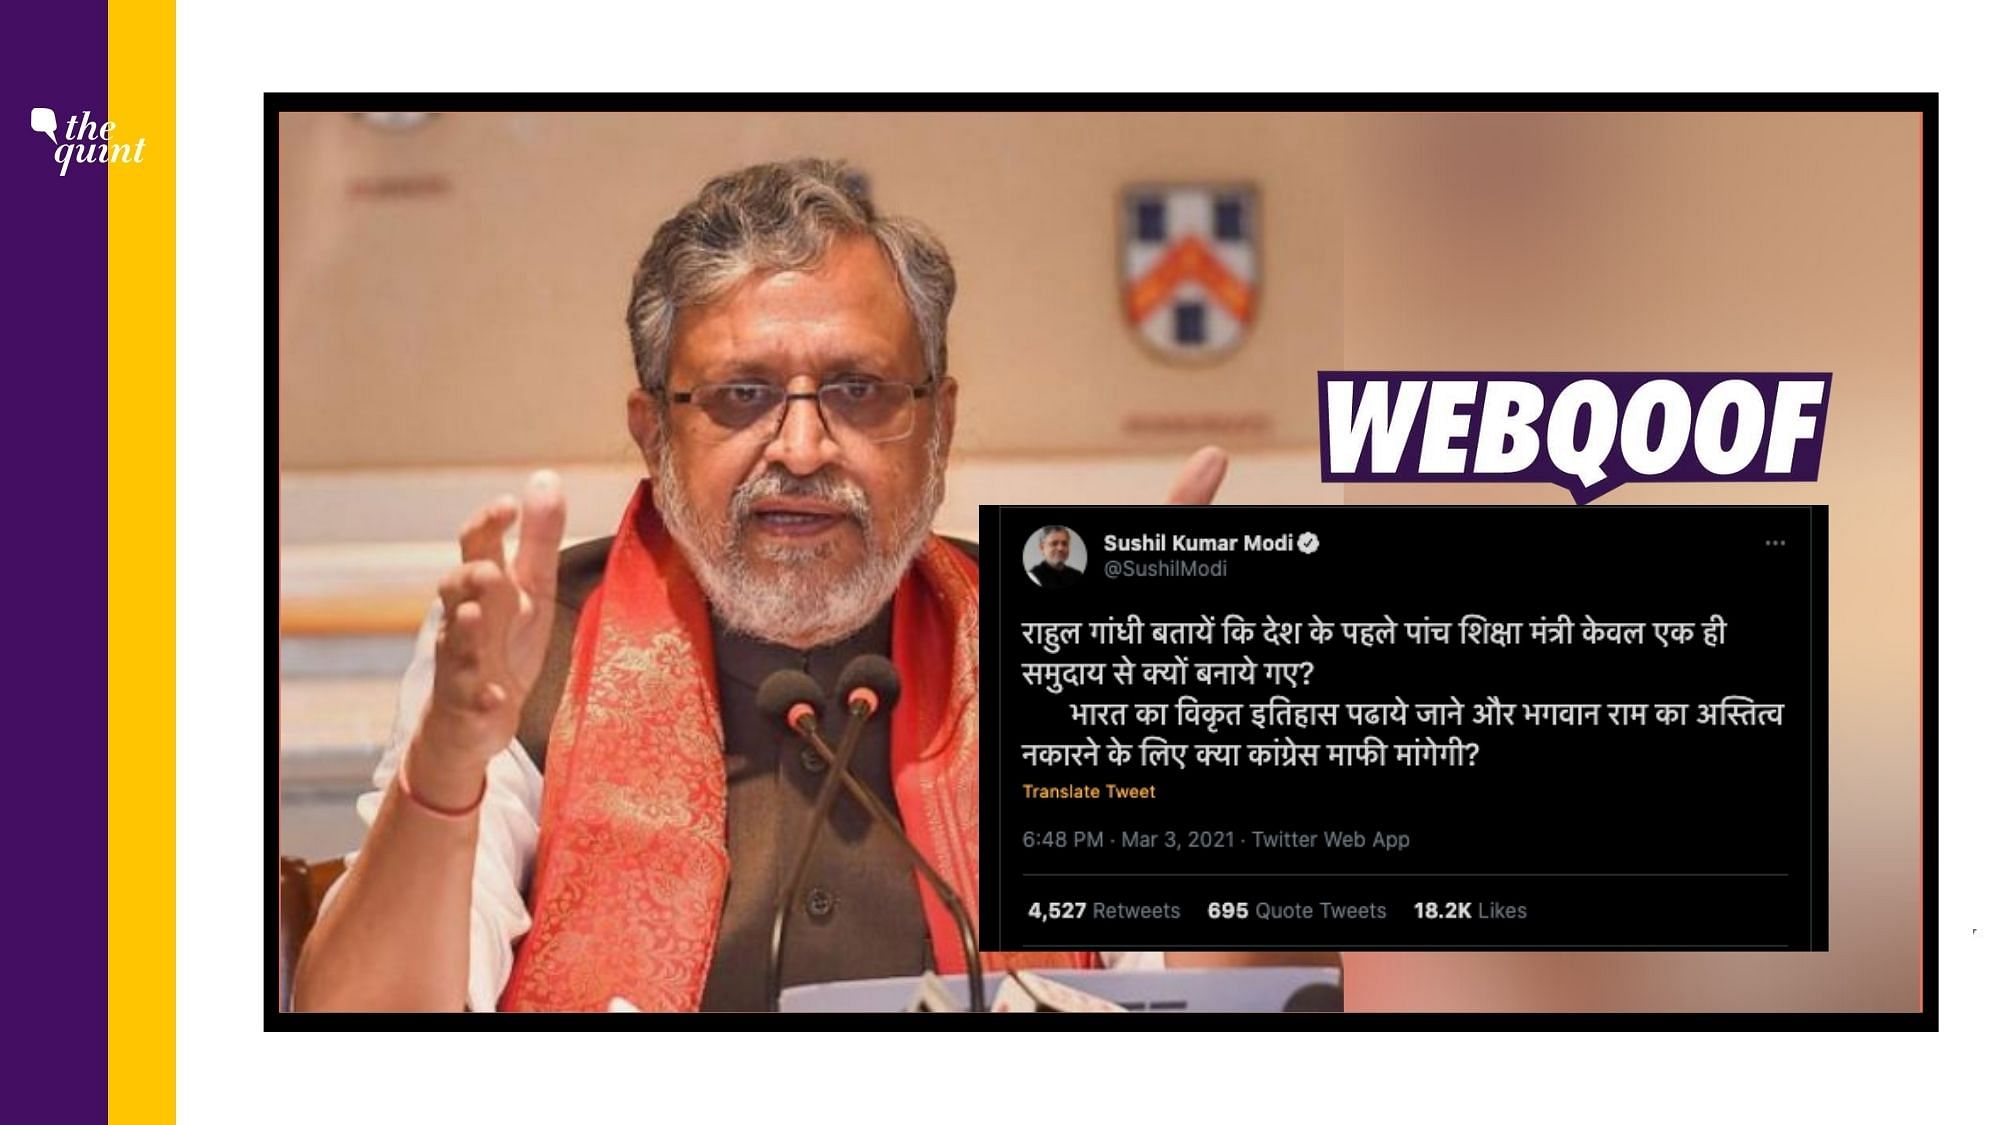 Sushil Kumar Modi claimed that the first five education ministers of India belonged to “one community.”